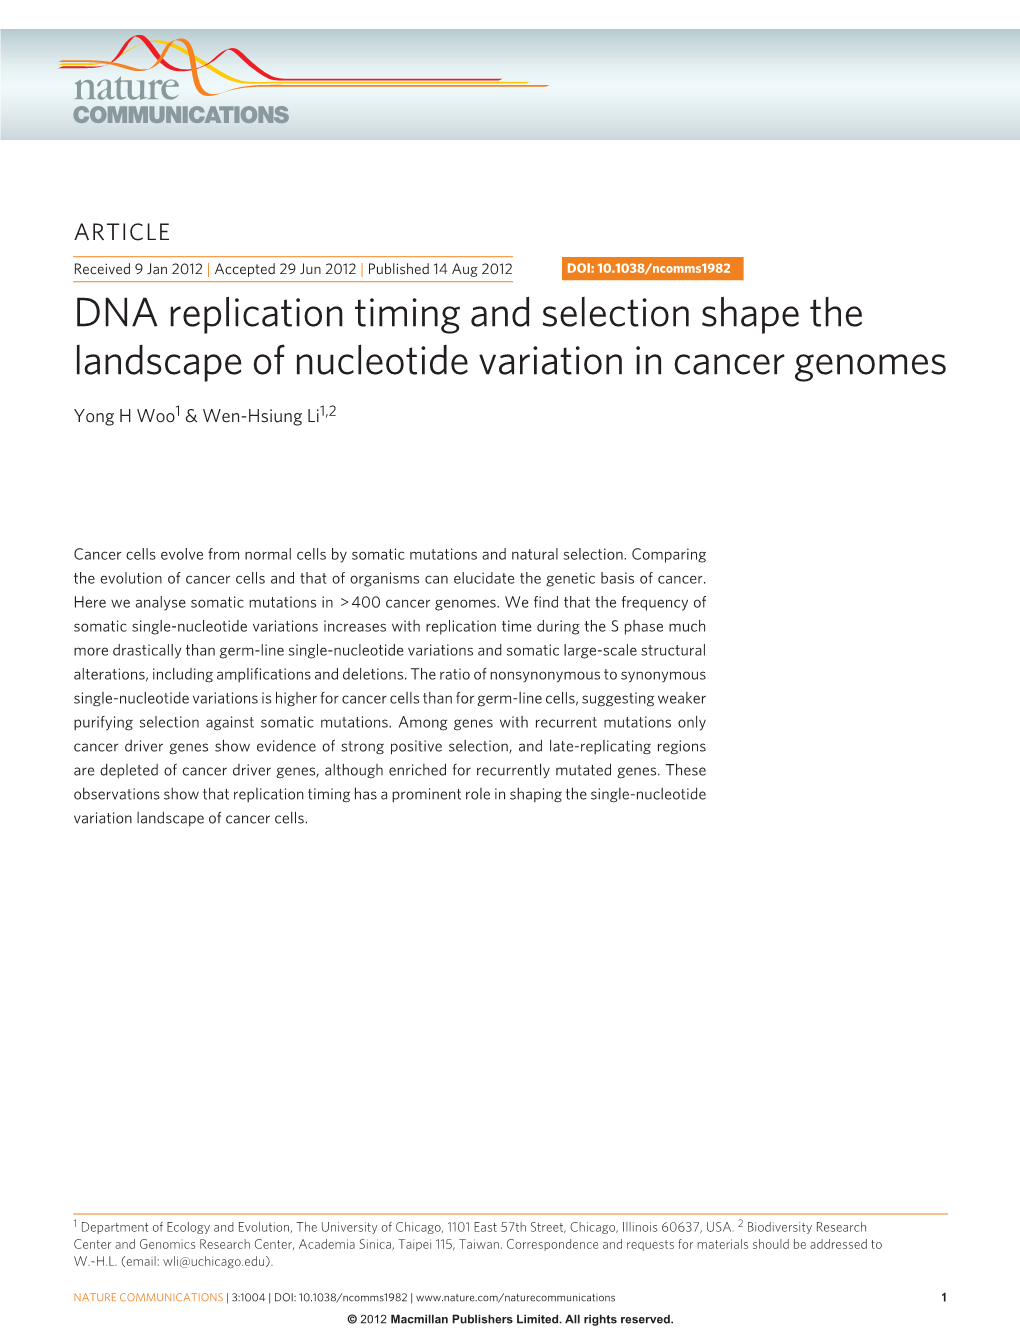 DNA Replication Timing and Selection Shape the Landscape of Nucleotide Variation in Cancer Genomes